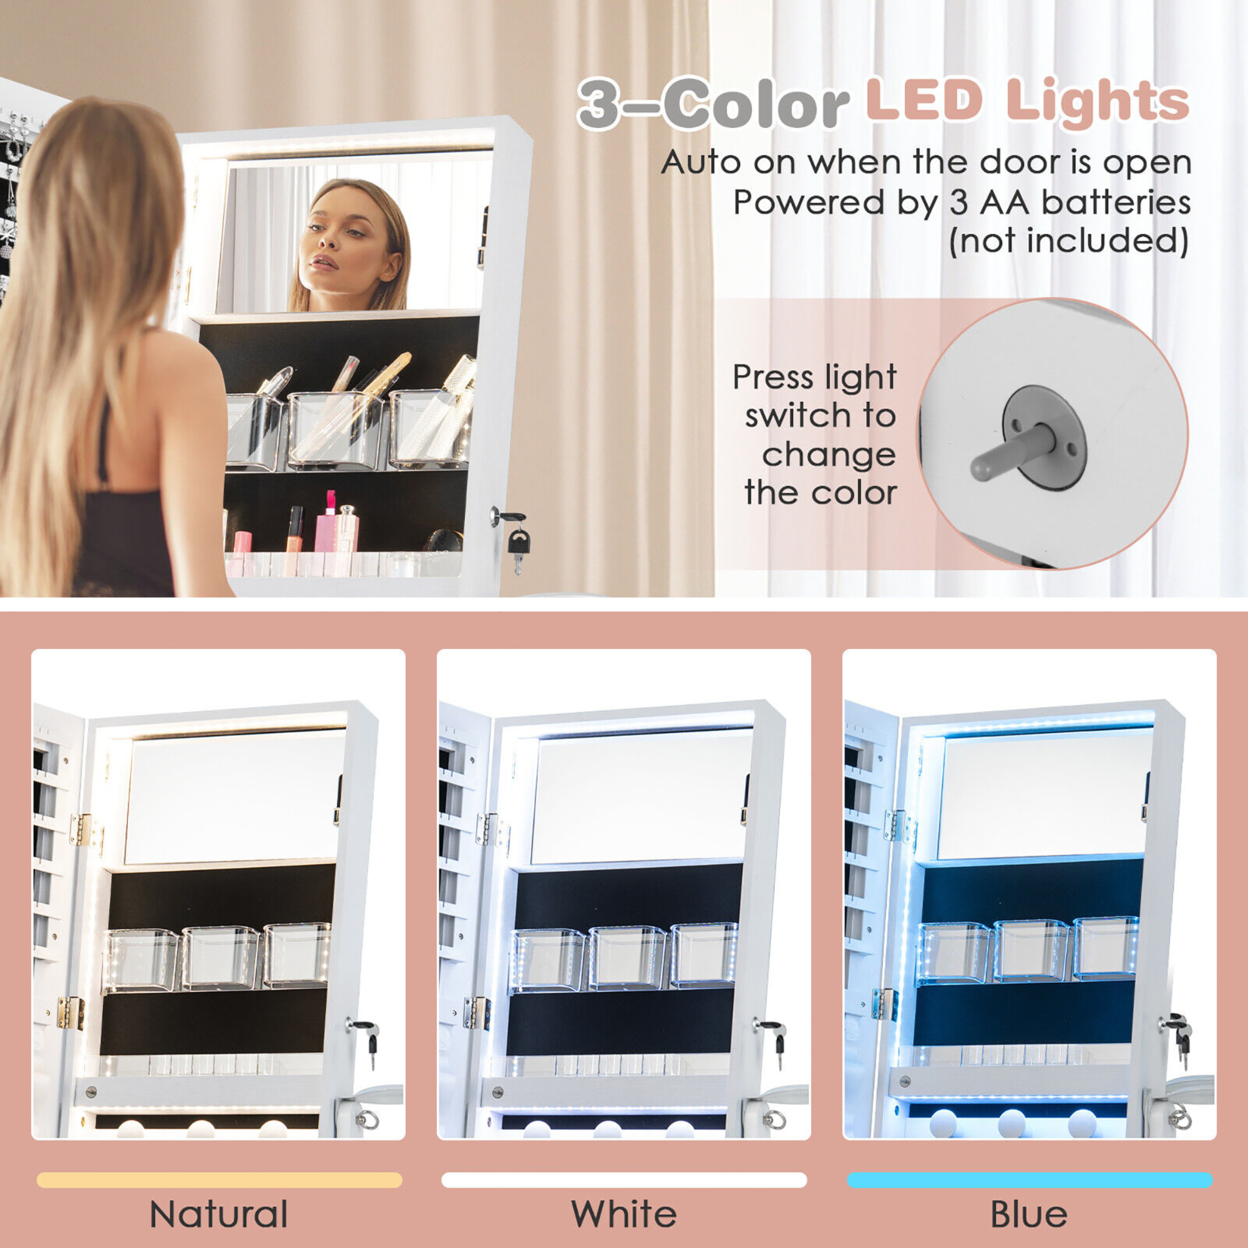 Standing Jewelry Cabinet Full Length Mirror Lockable W/ 3-Color LED Lights - Black